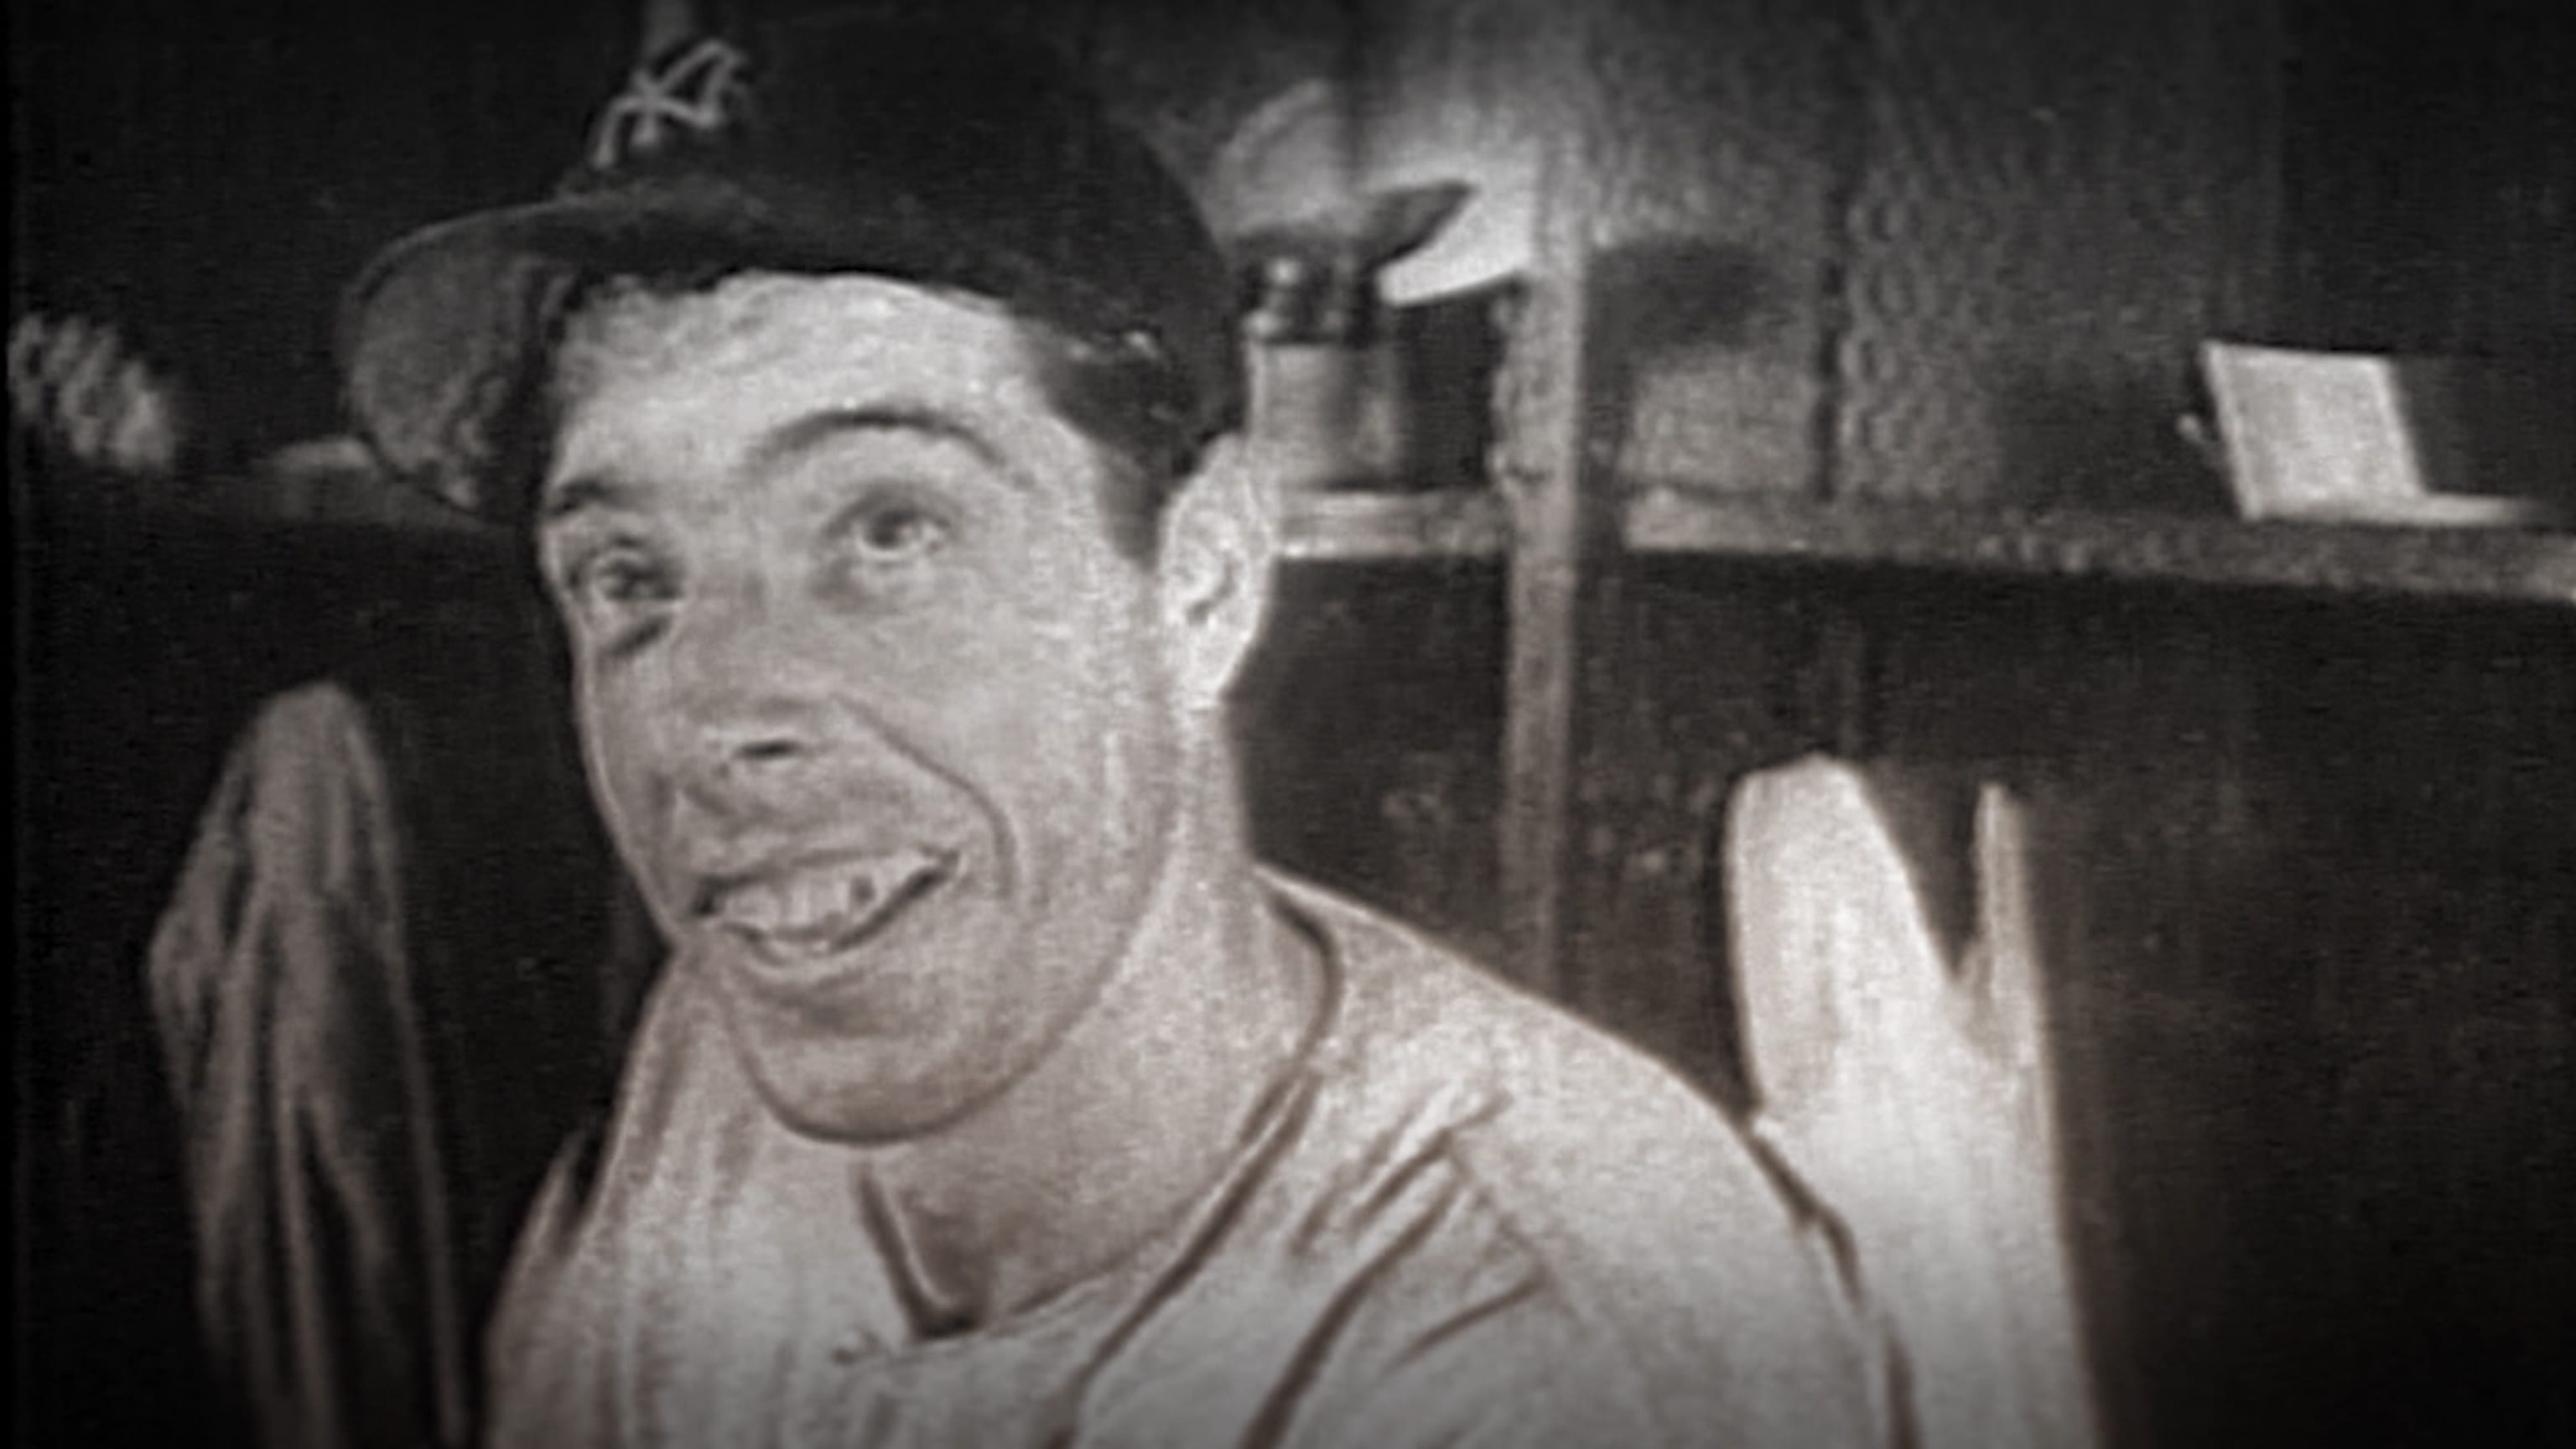 A statistical deep dive on the underrated Joe DiMaggio